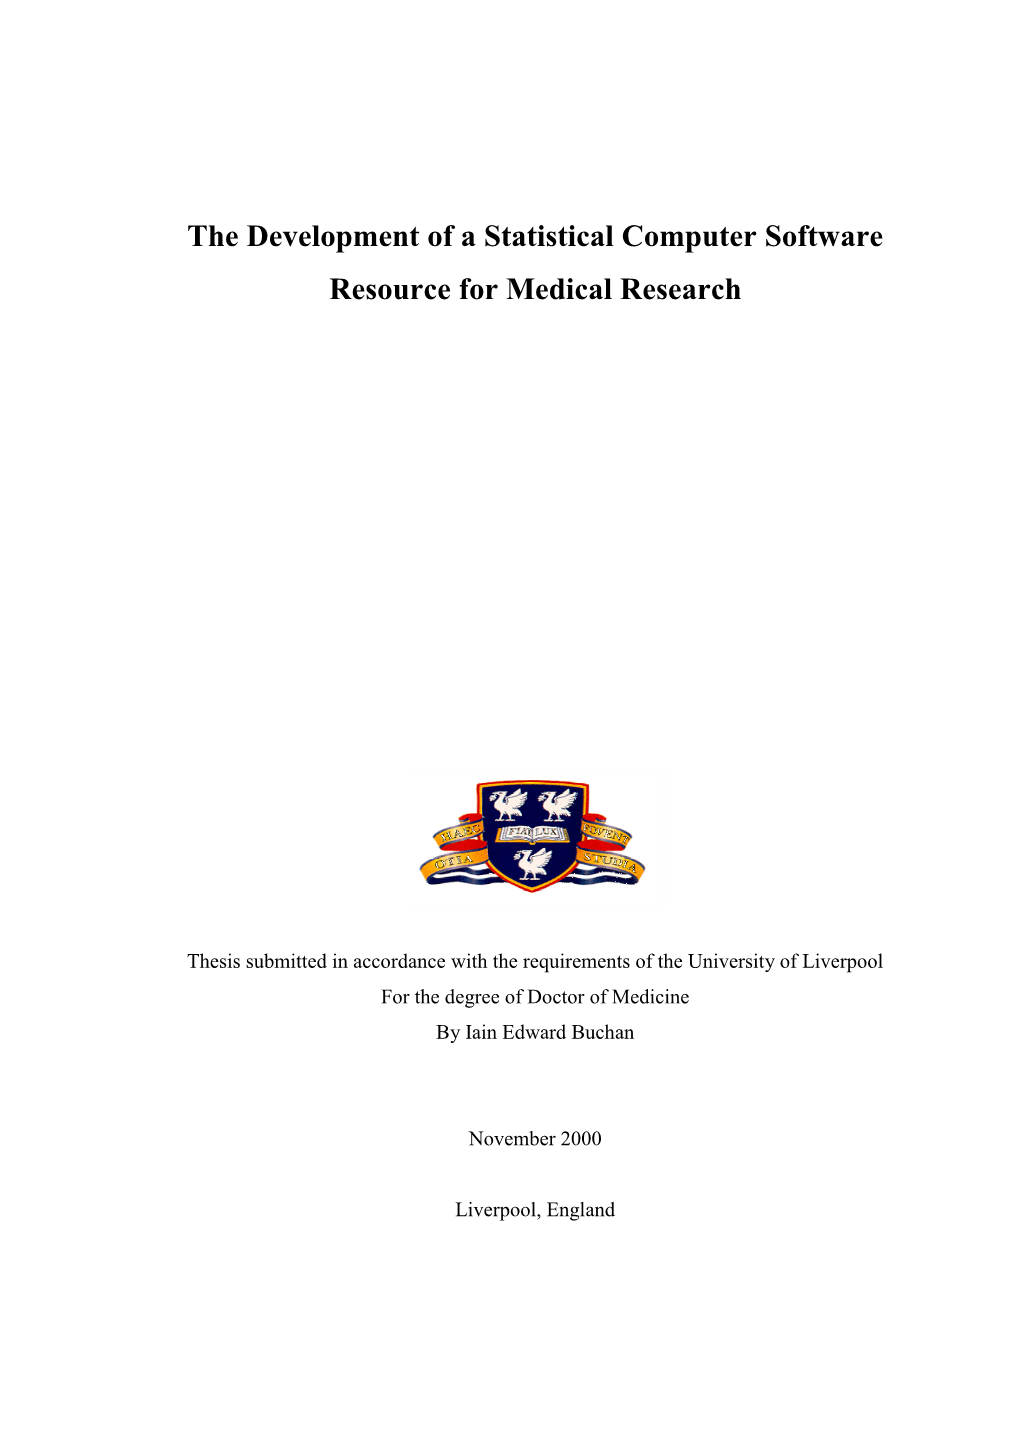 The Development of a Statistical Software Resource for Medical Research: MD Thesis of Iain Edward Buchan